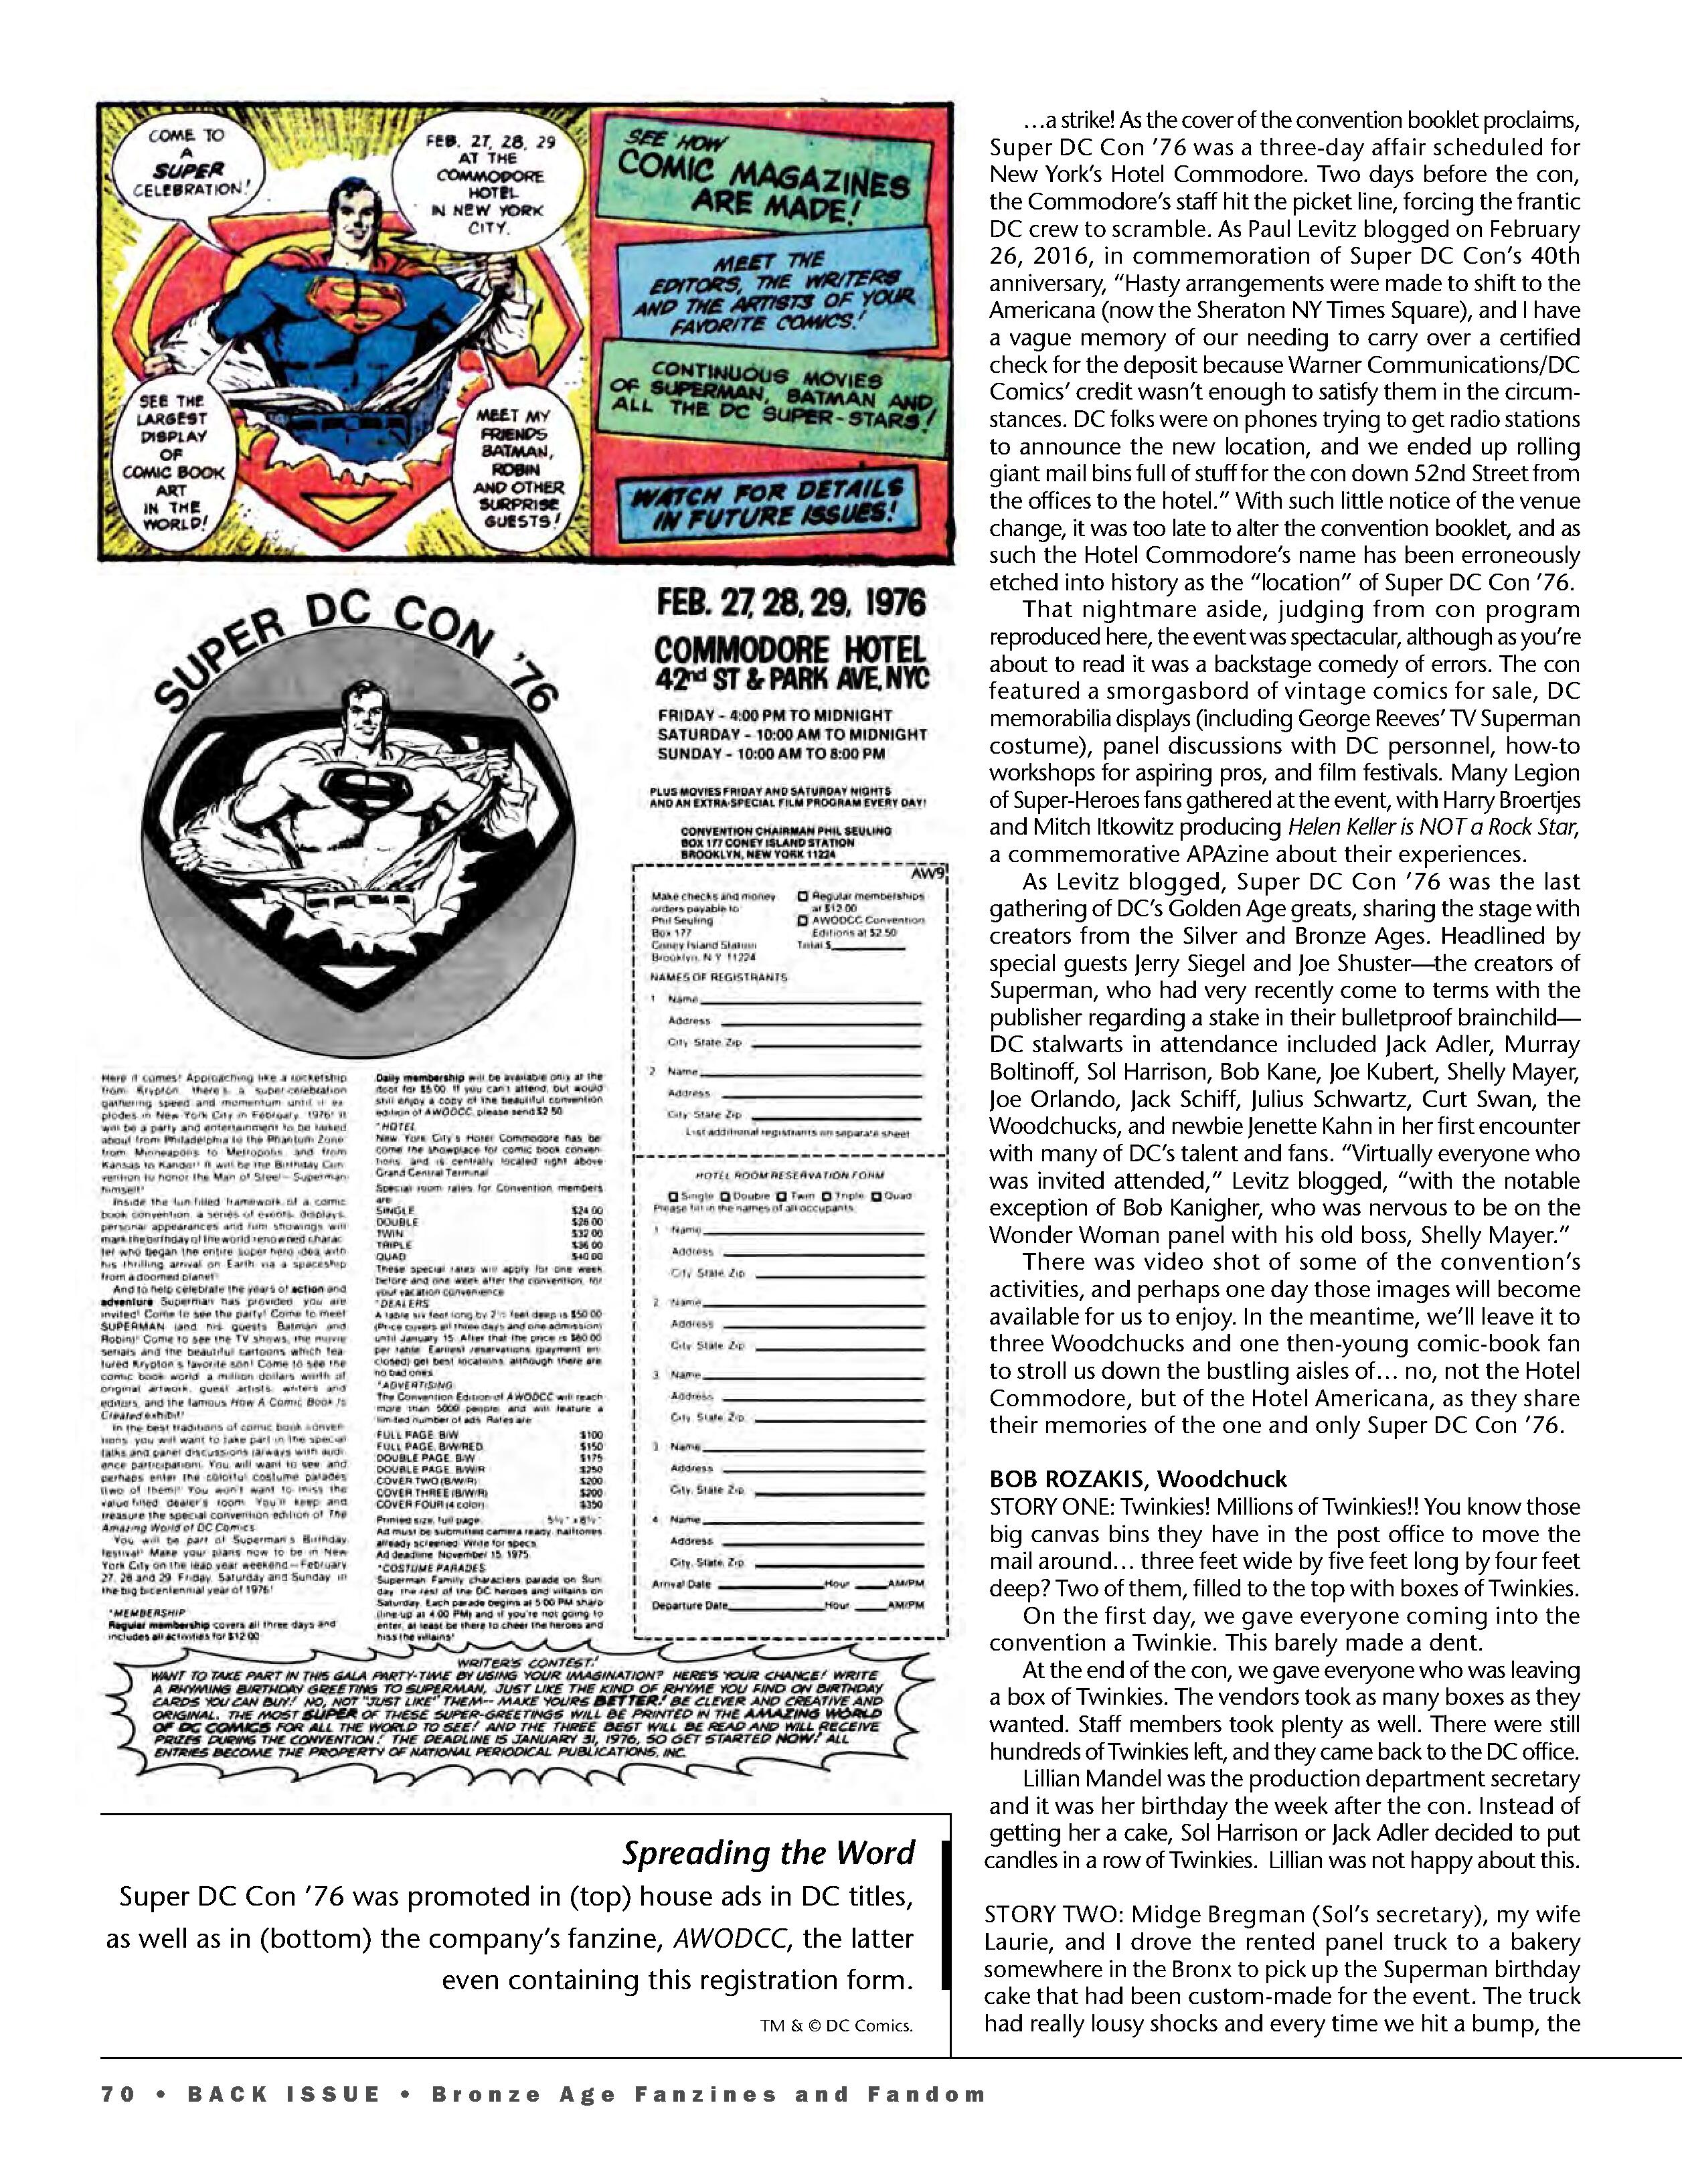 Read online Back Issue comic -  Issue #100 - 72